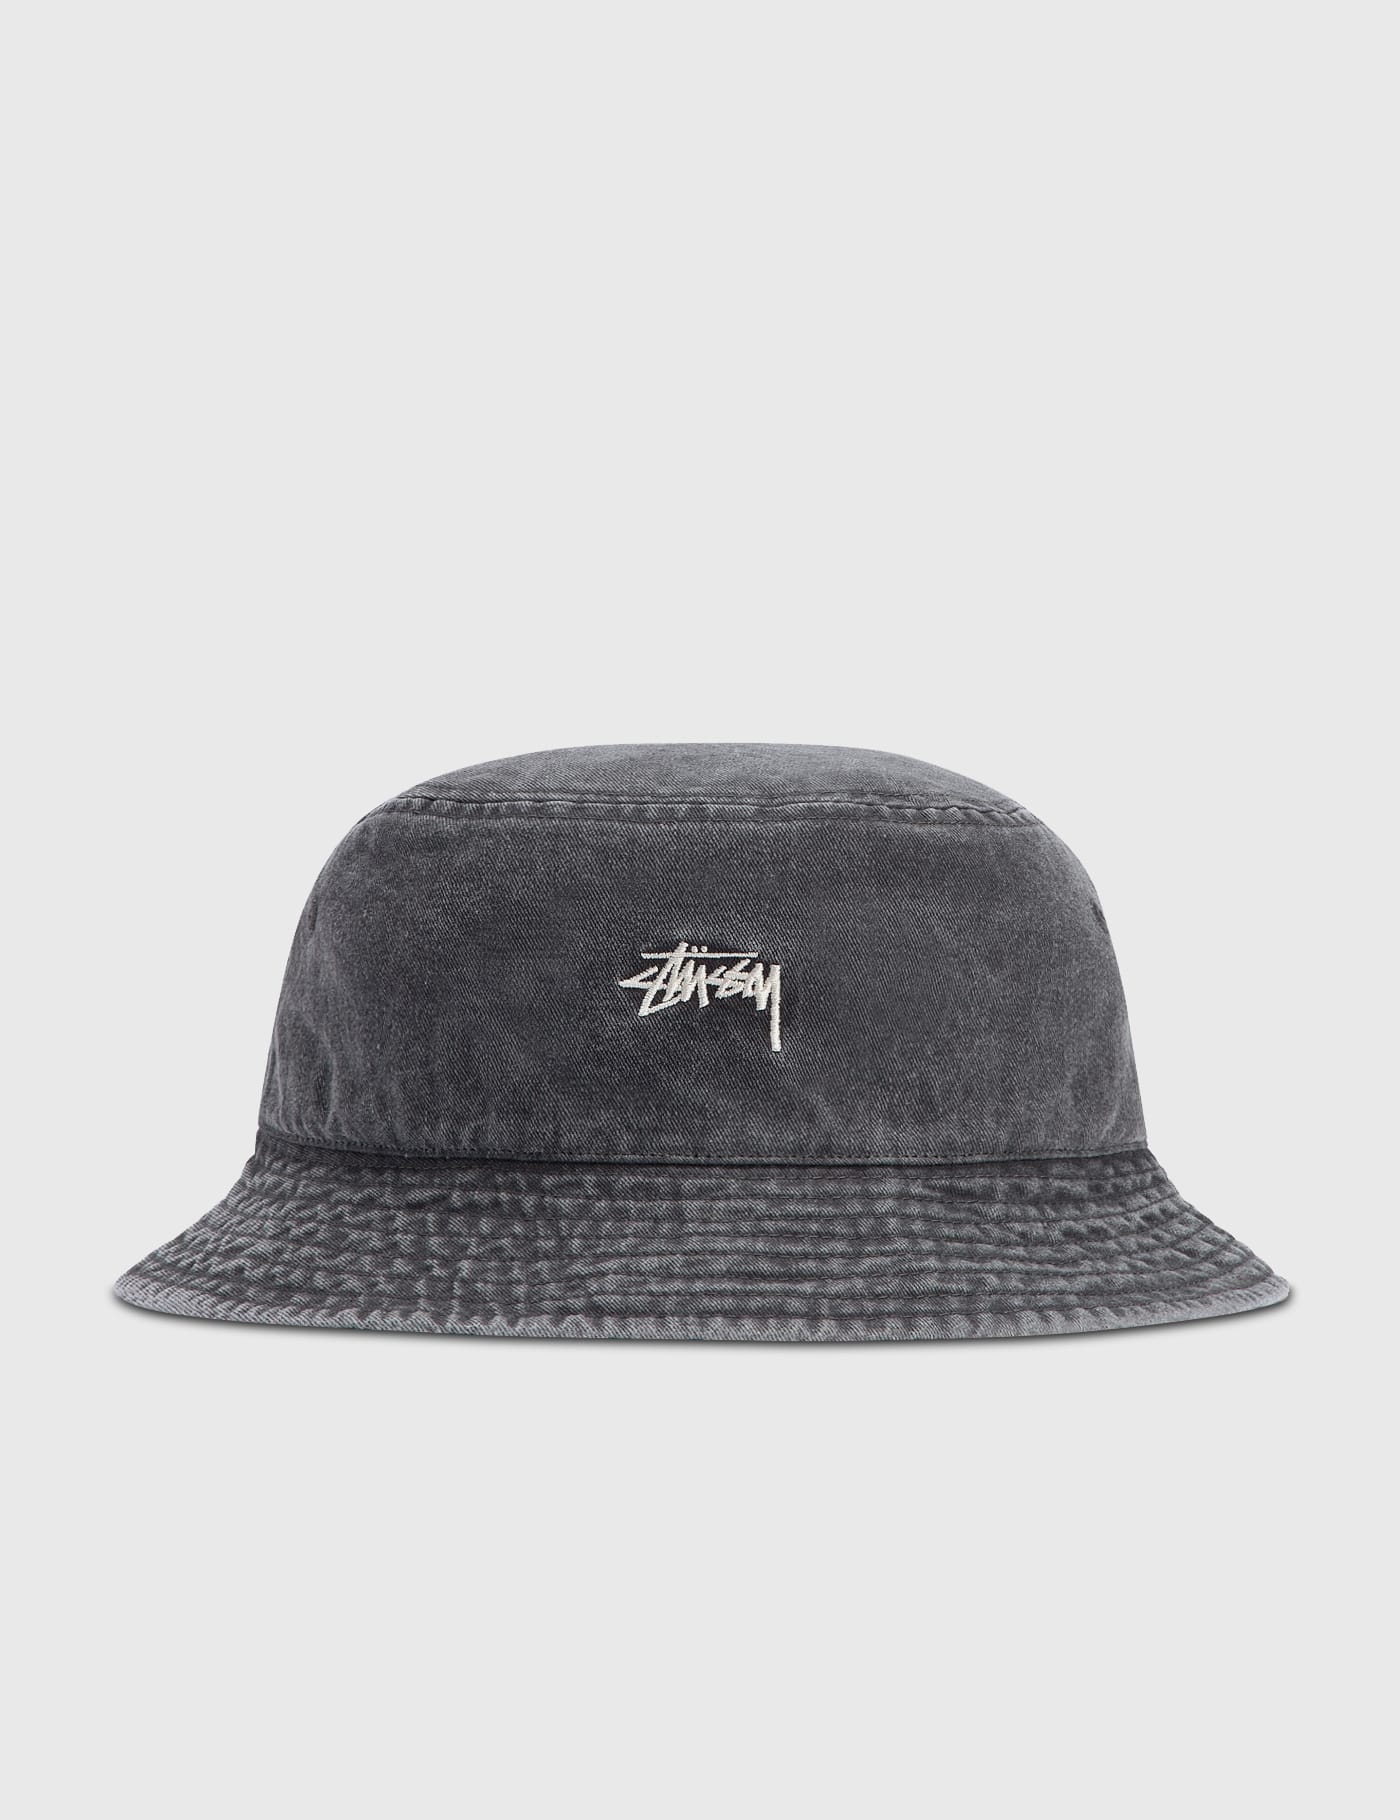 Stüssy - Washed Stock Bucket Hat | HBX - Globally Curated Fashion 